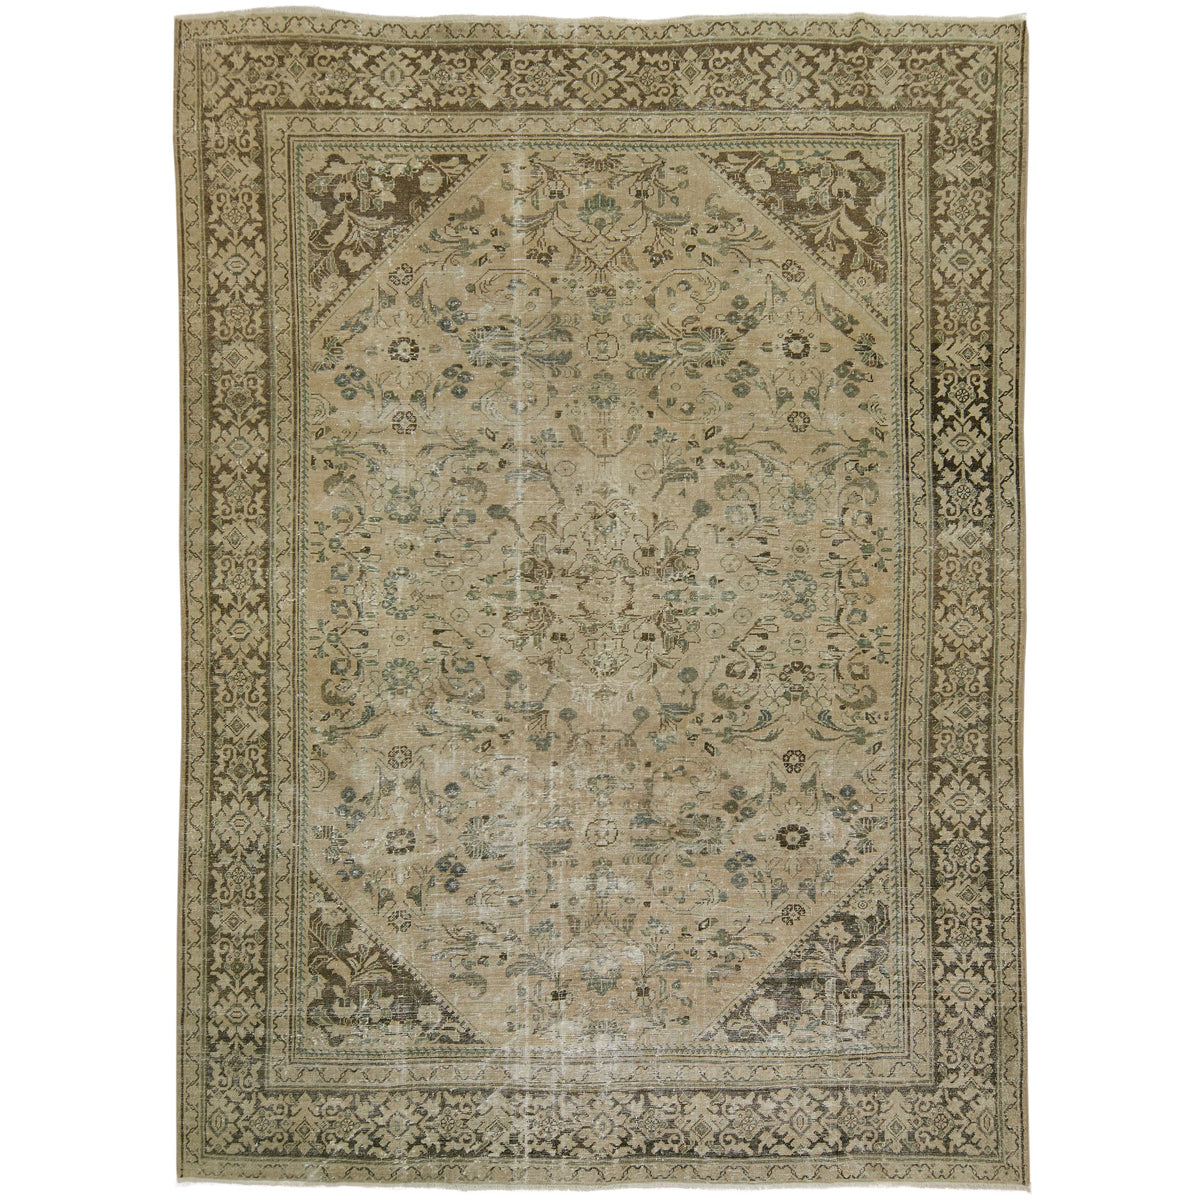 Melissa - Elegance Woven with Tradition | Kuden Rugs